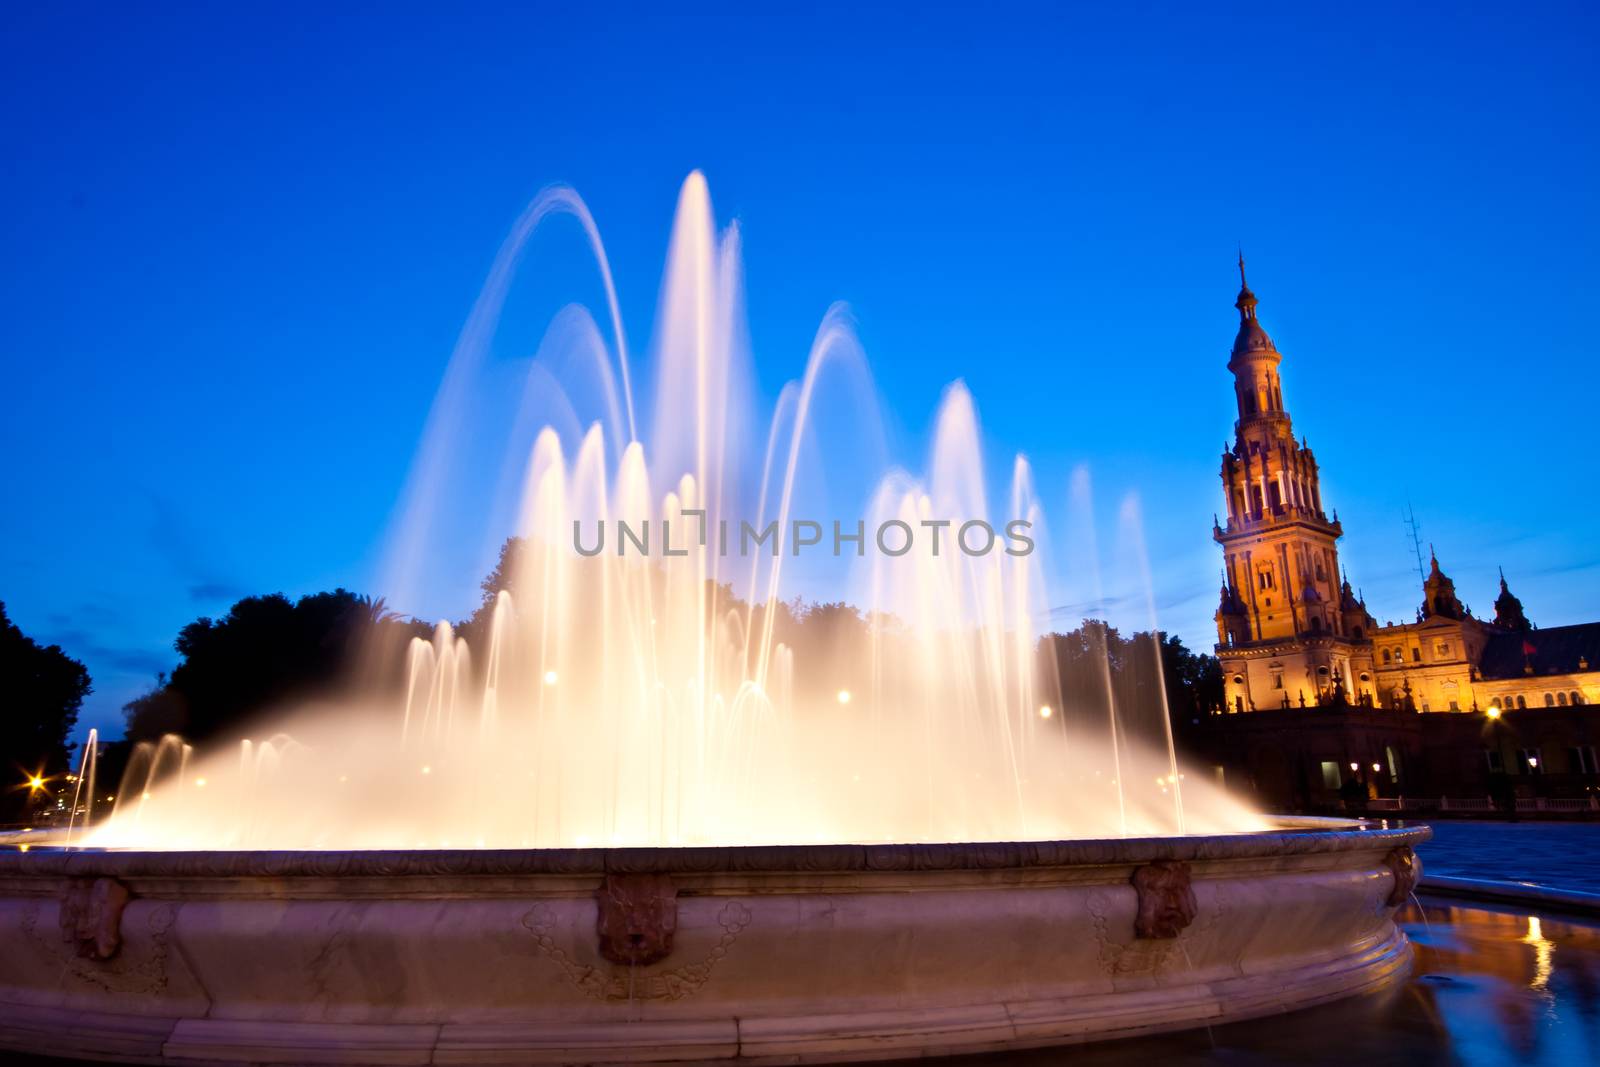 A view of the Plaza de Espana in Seville at dusk, Spain